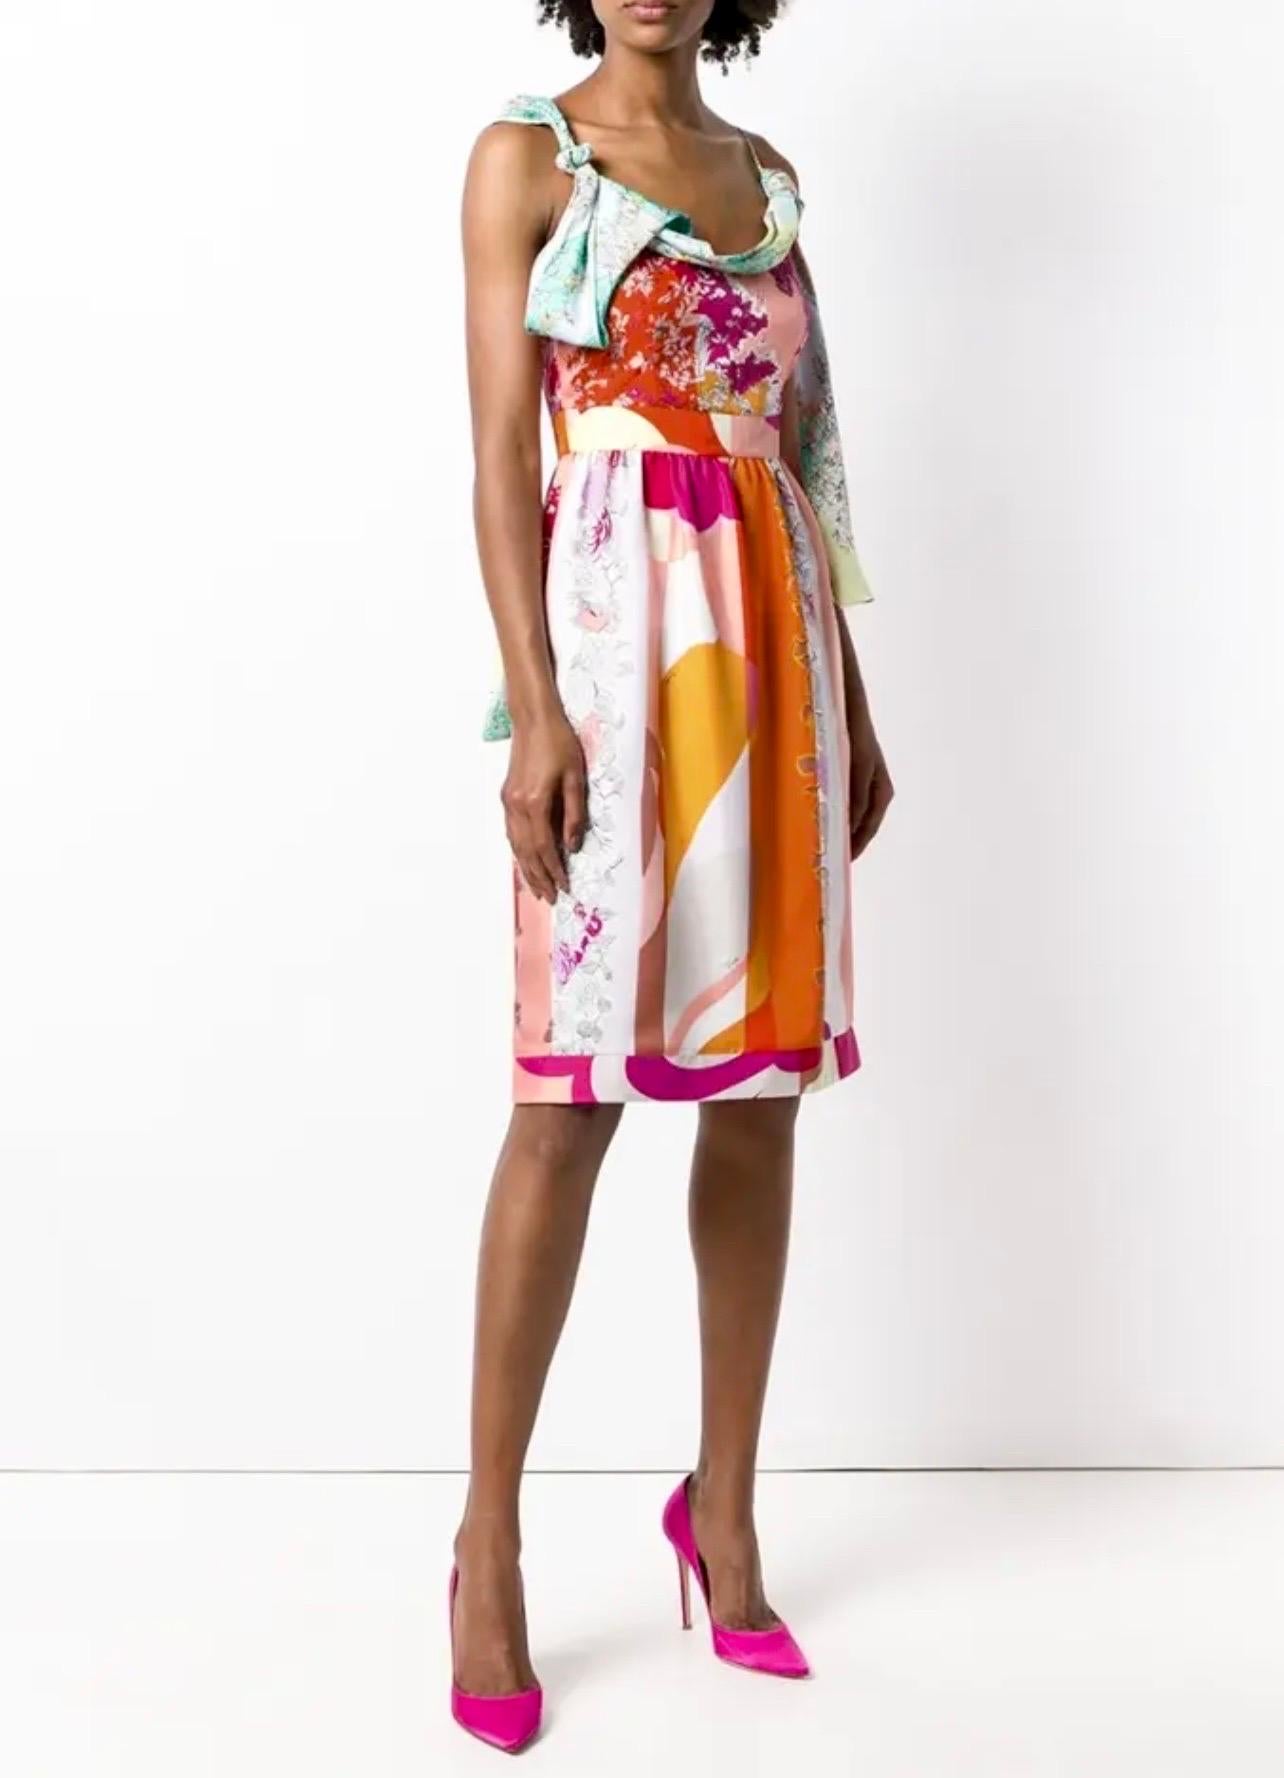 Beautiful Emilio Pucci Silk Dress
In the famous signature print 
A special limited edition in the Pucci archivio print
Fabulous print combination 
